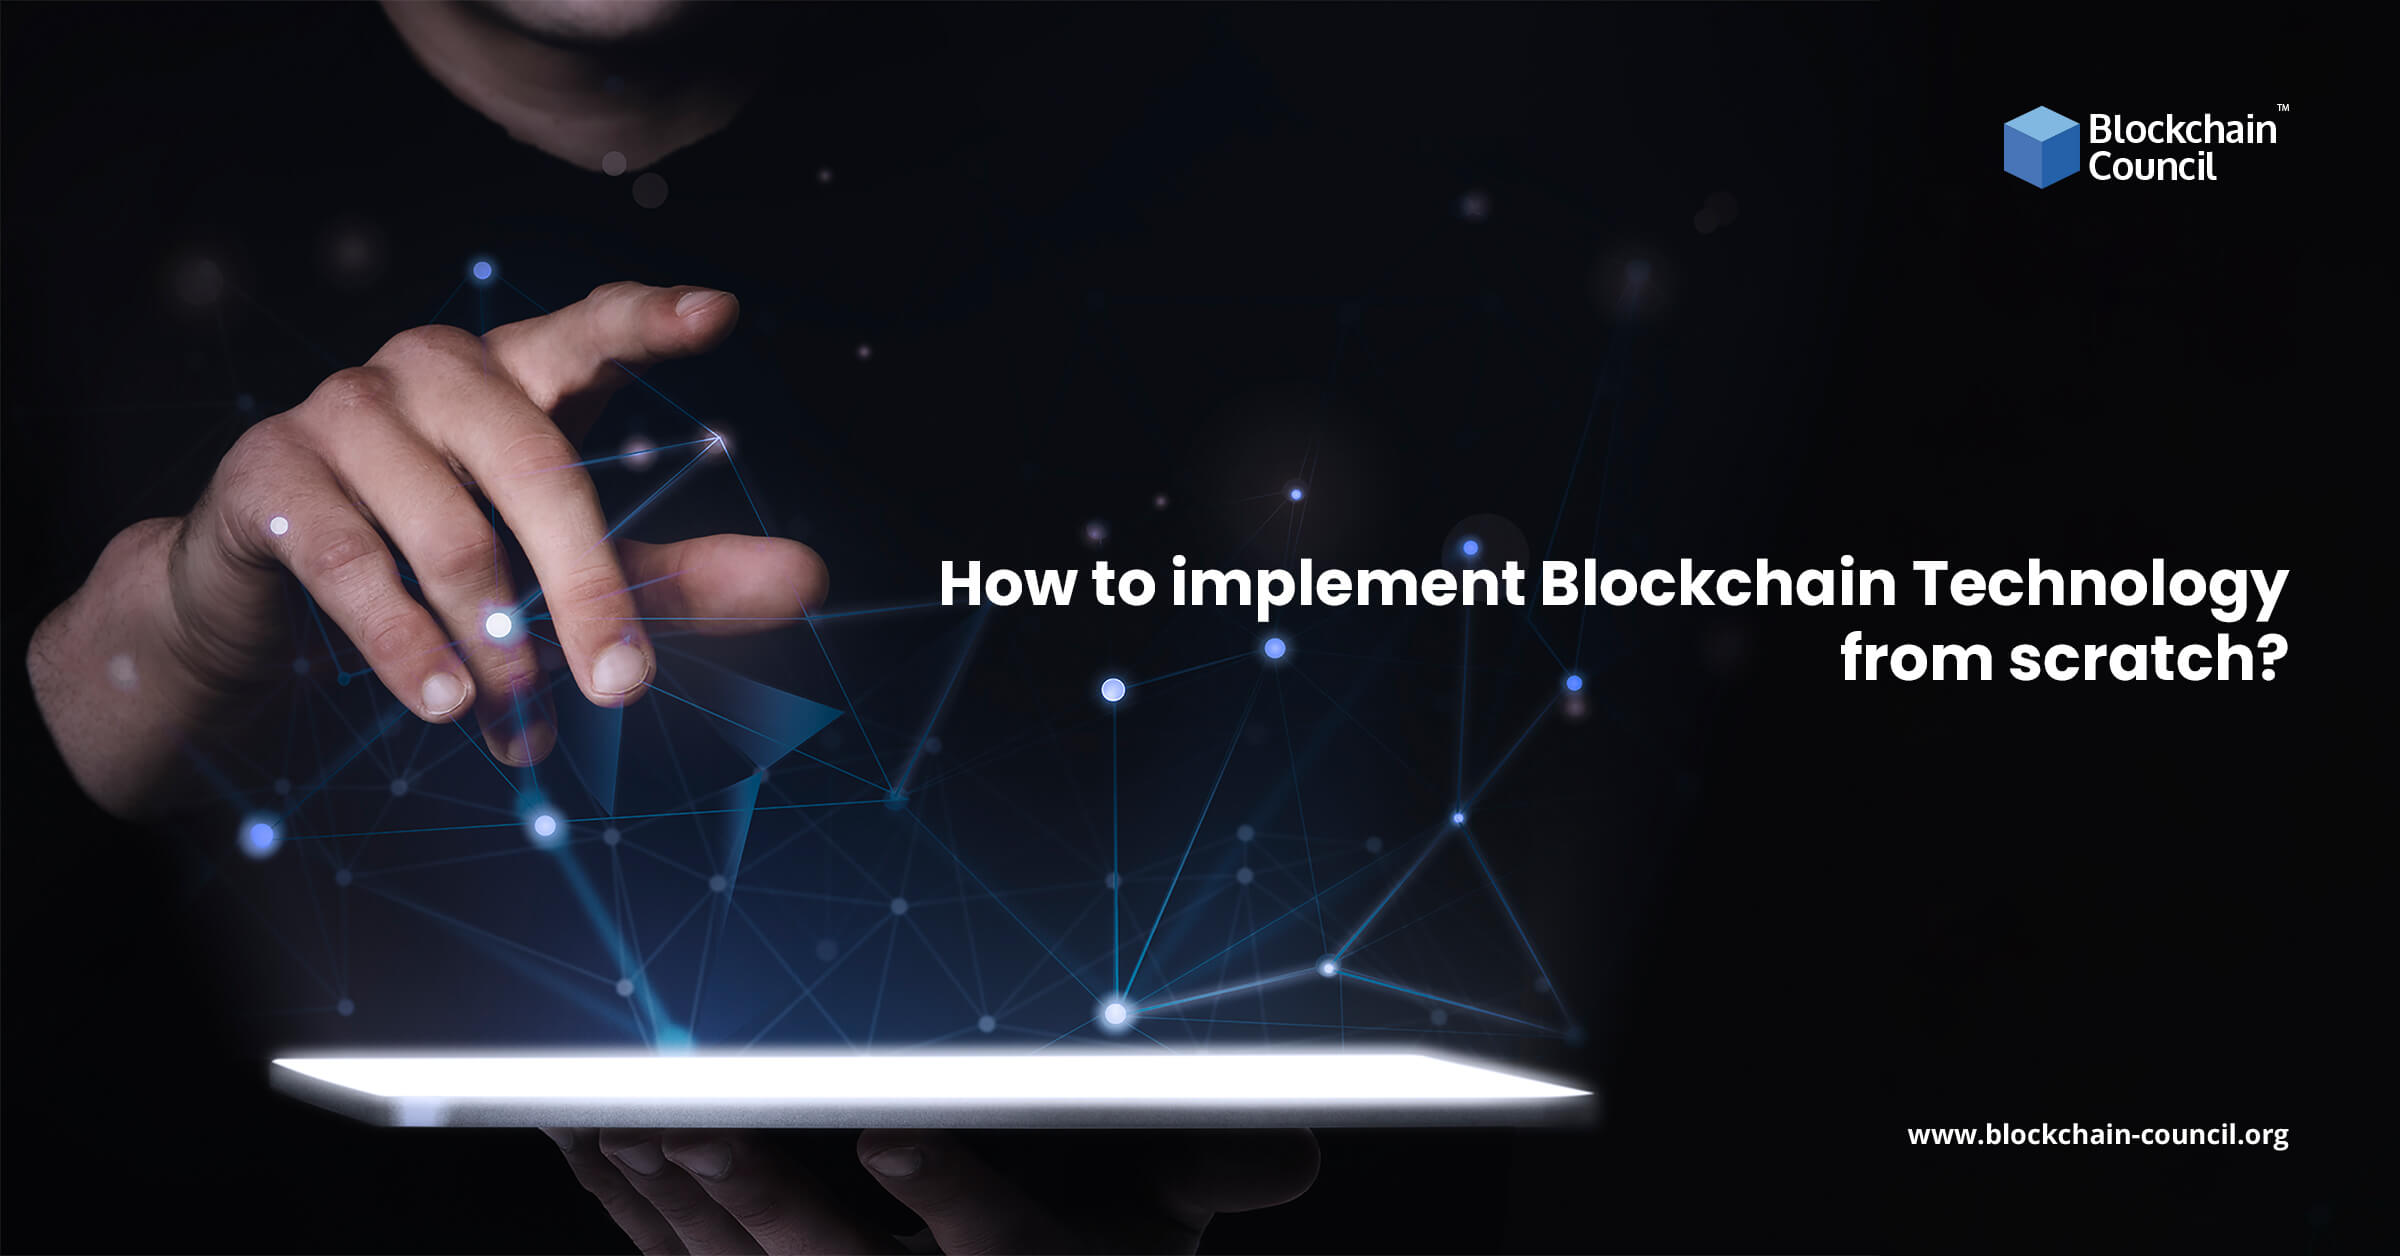 How to implement Blockchain Technology from scratch